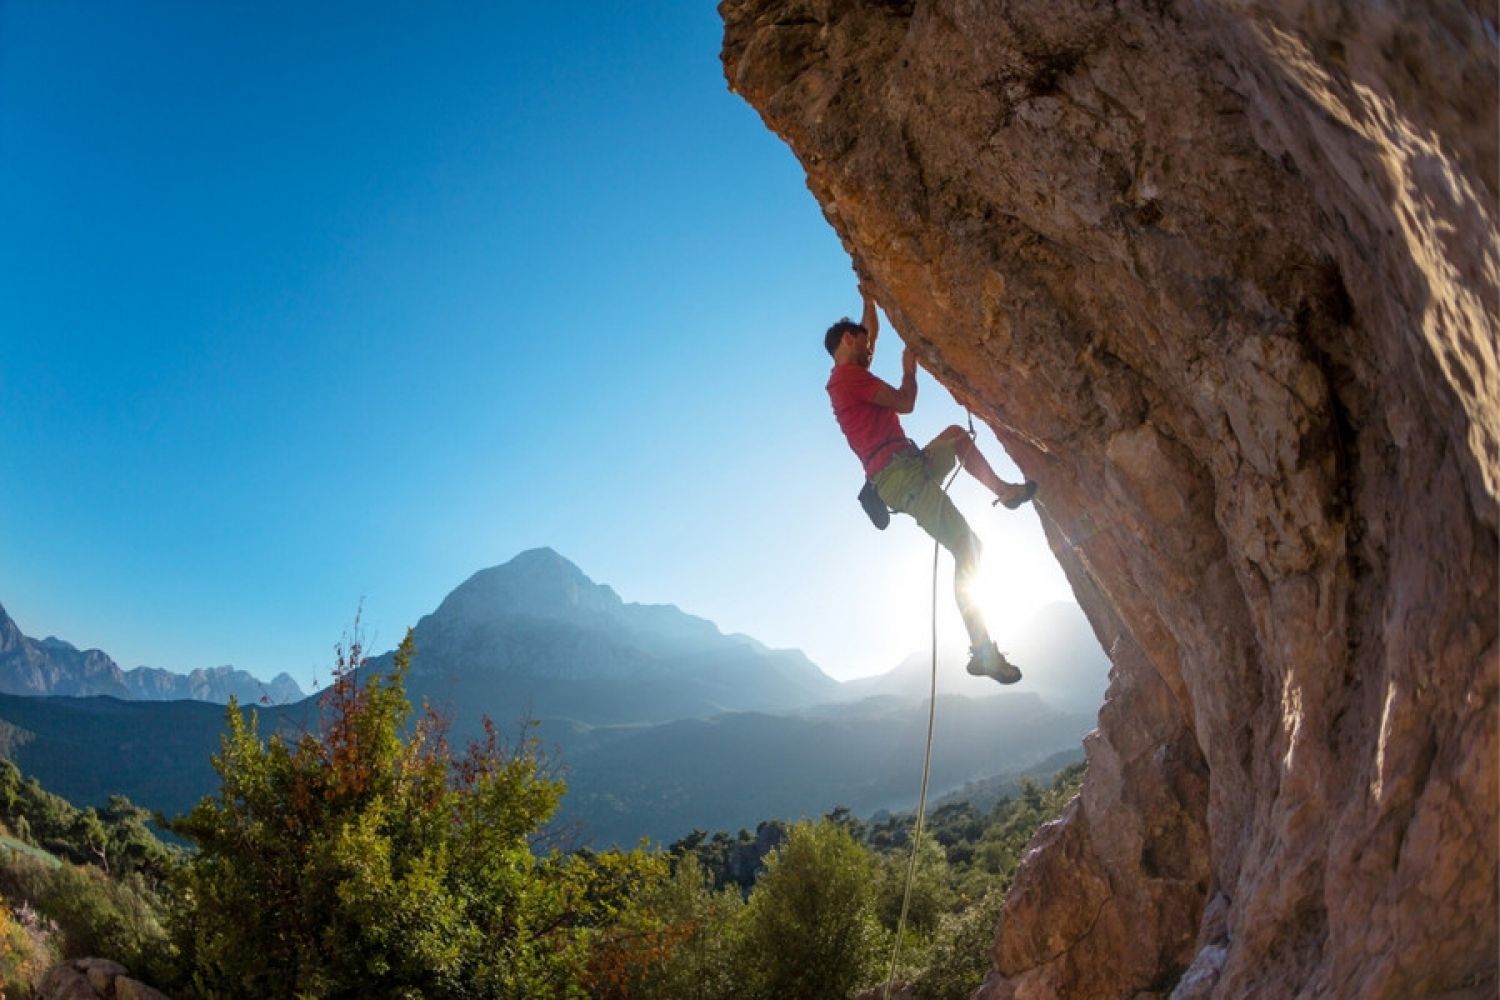 Top 5 Outdoor Challenges Activities You Should Try for an Adrenaline-Fueled Adventure